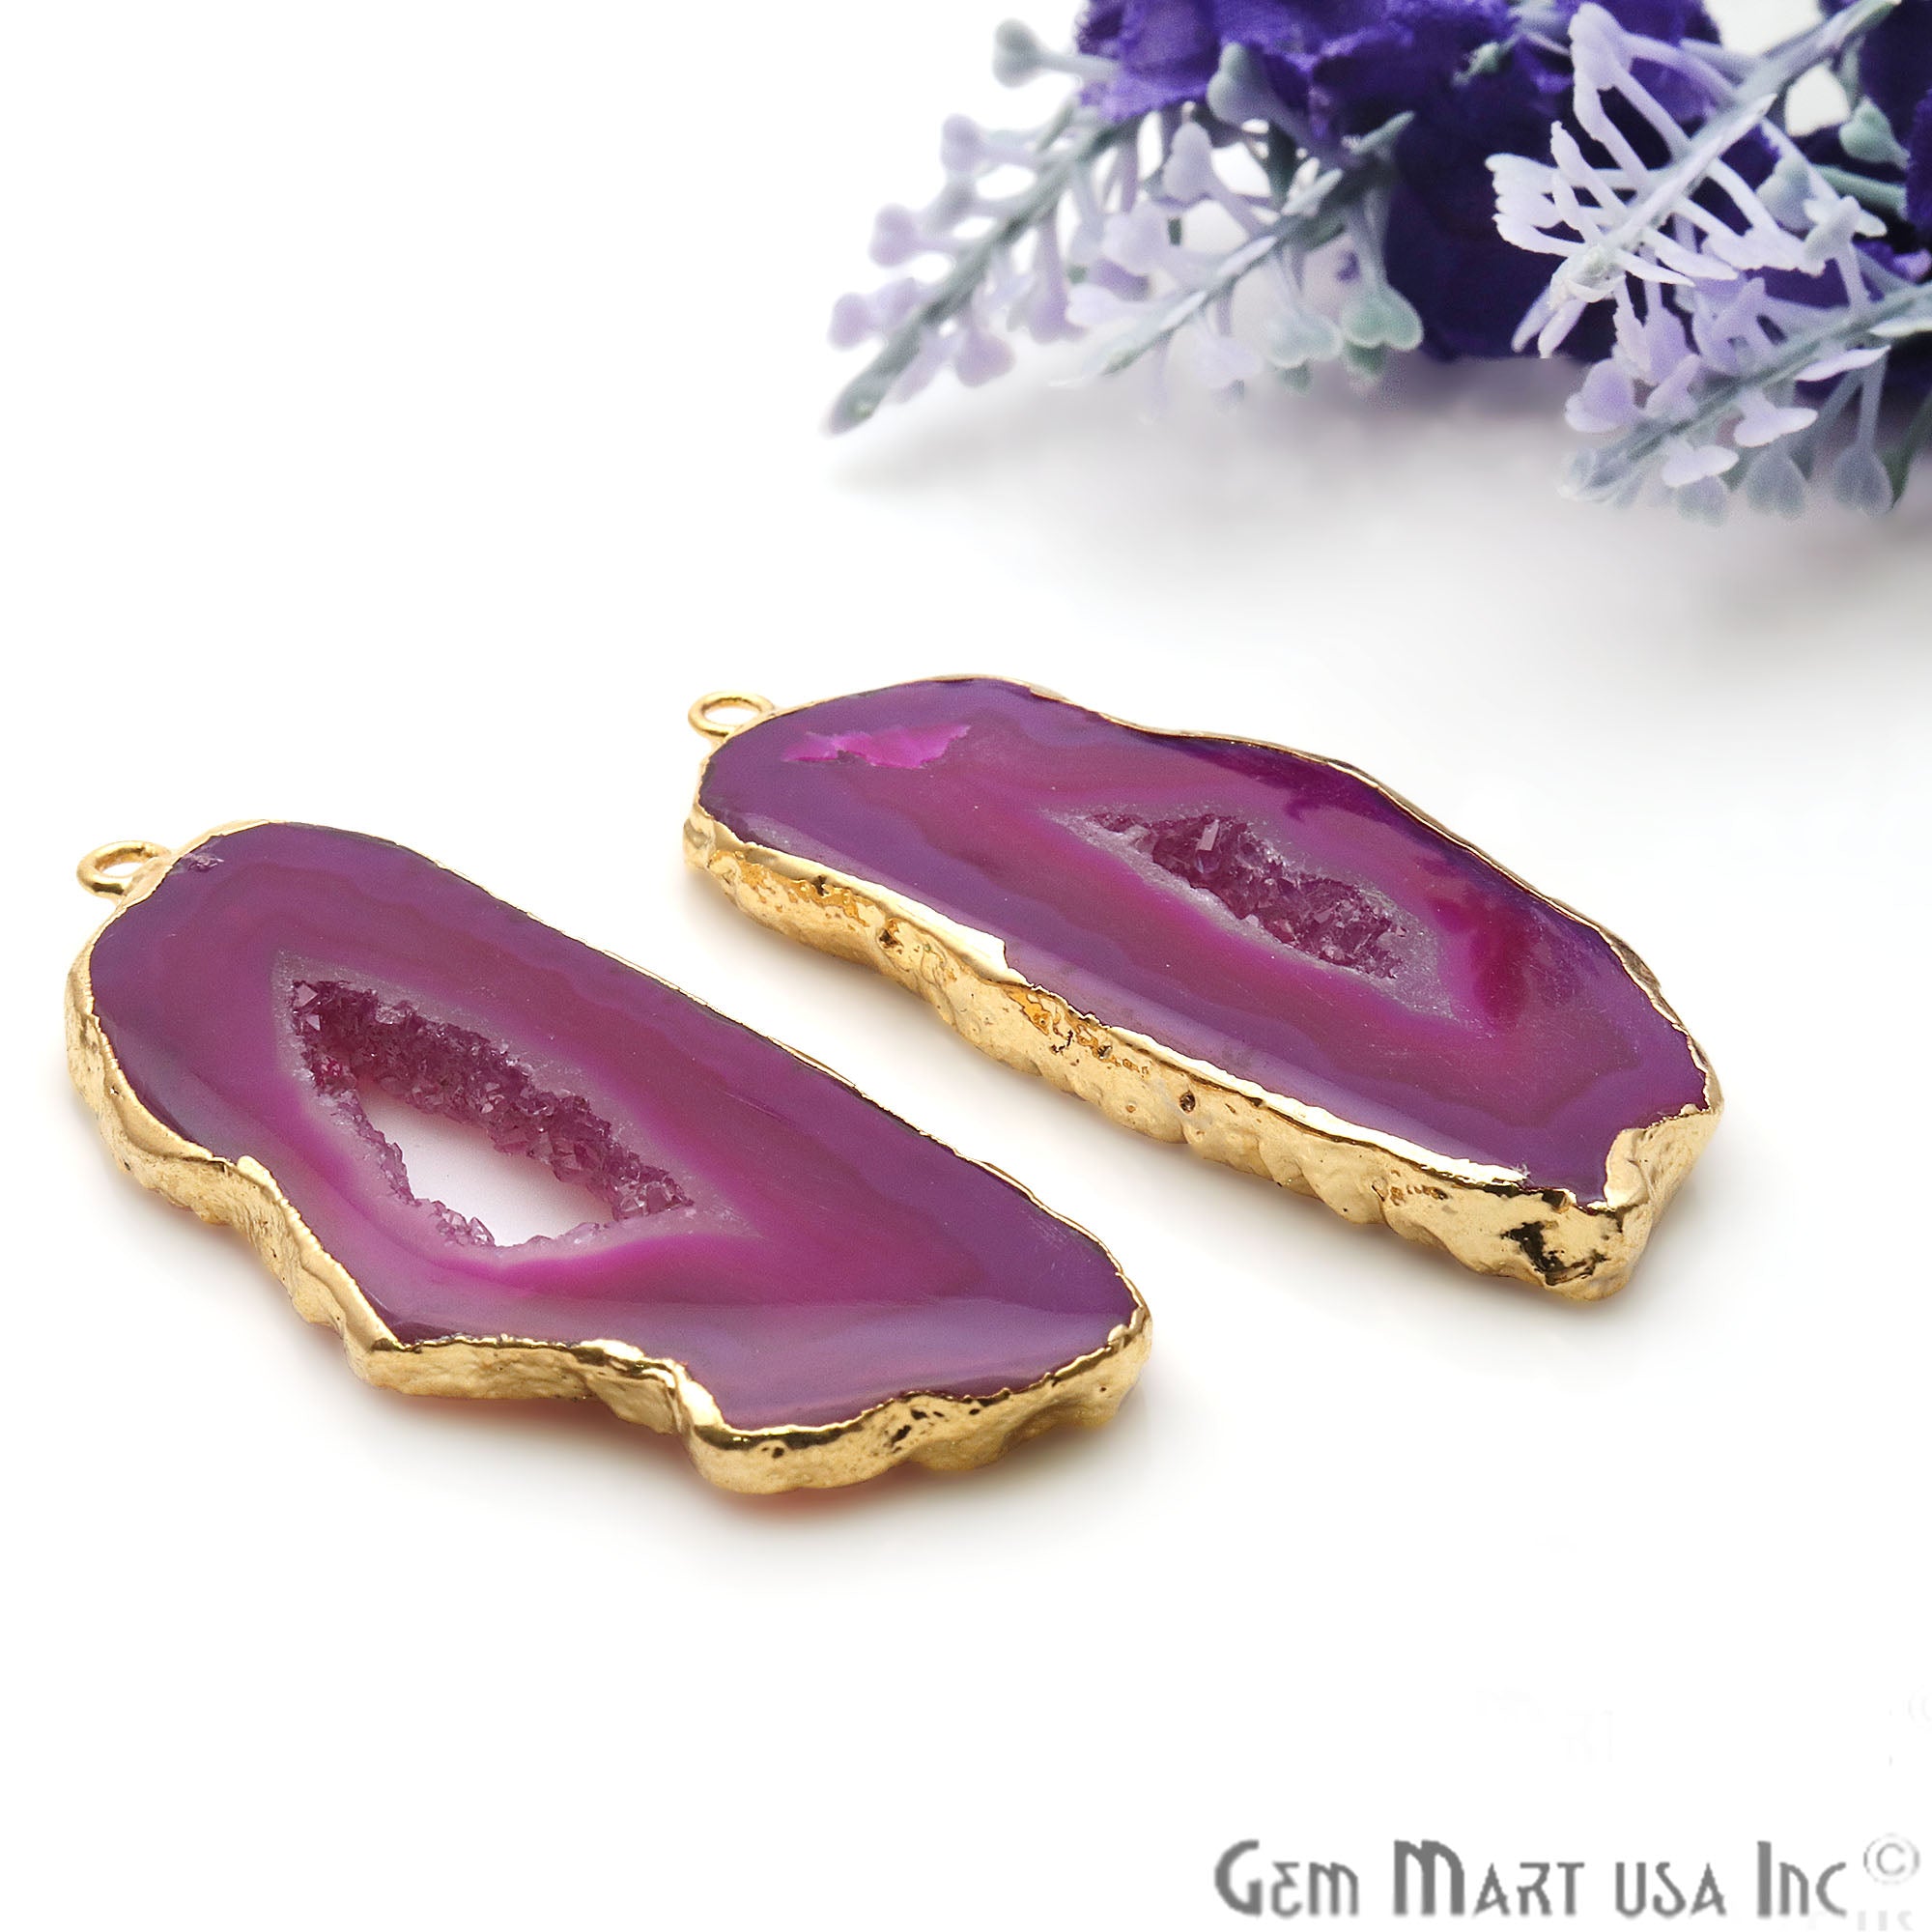 Agate Slice 49x21mm Organic Gold Electroplated Gemstone Earring Connector 1 Pair - GemMartUSA